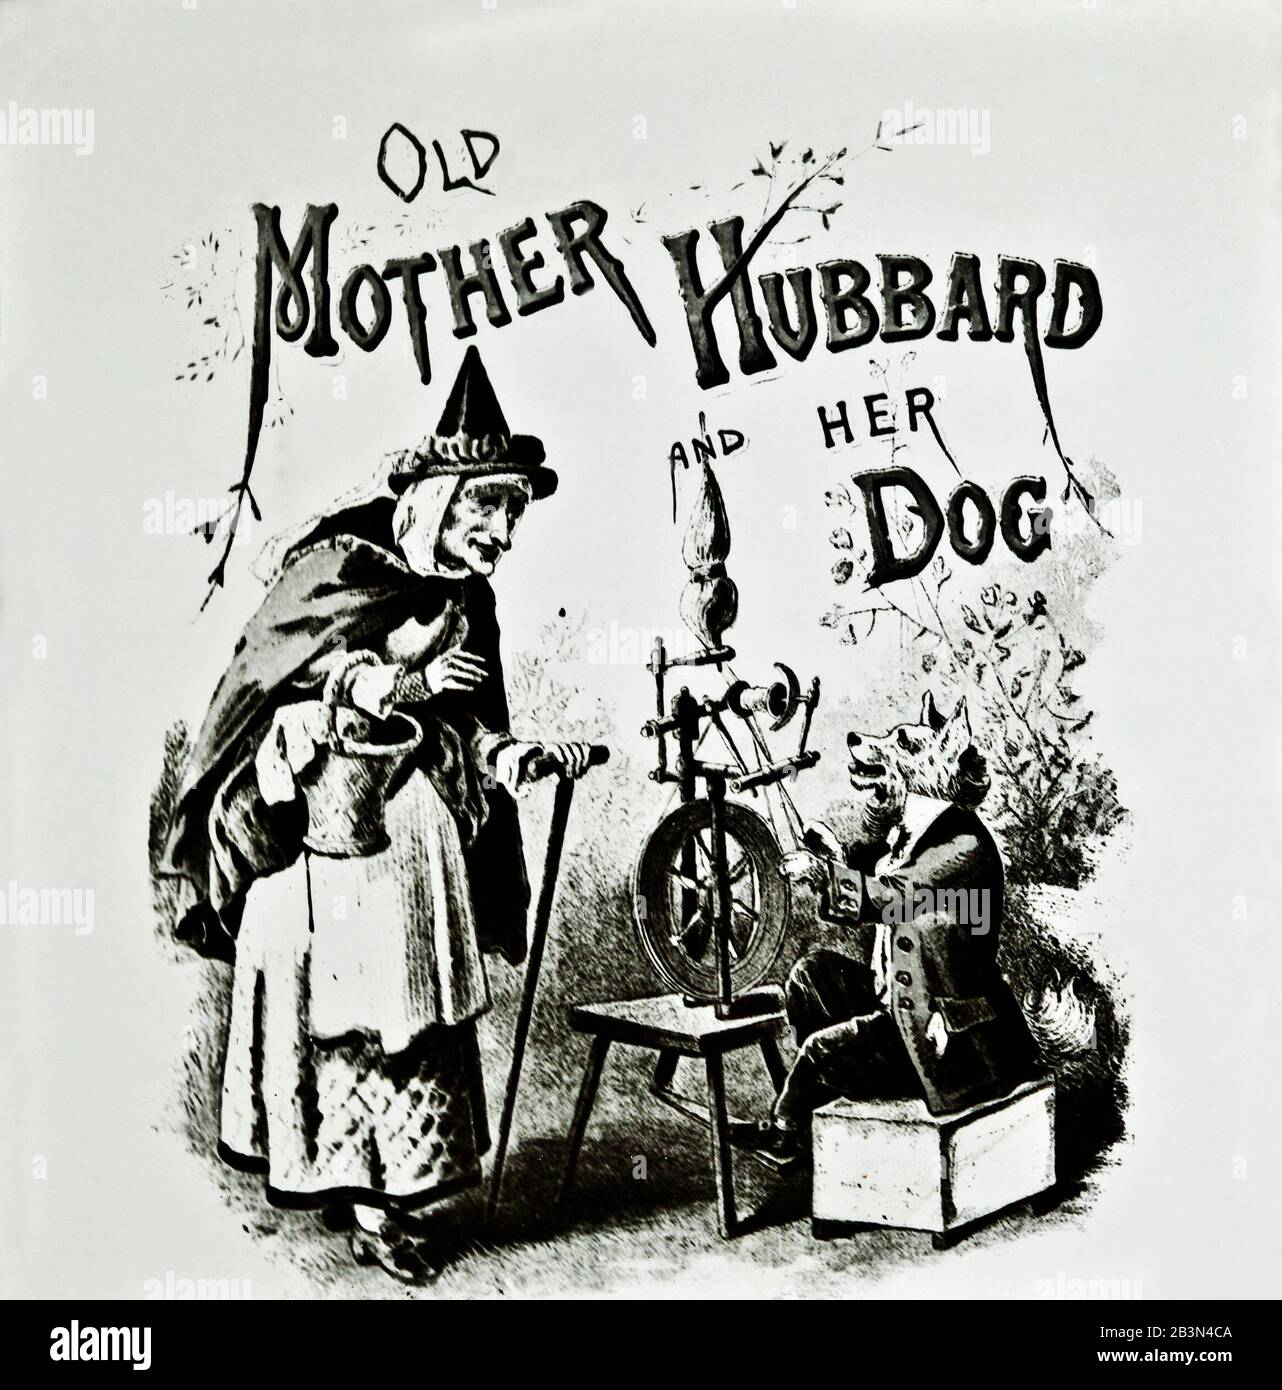 “Old Mother Hubbard” rhyme was published in 1805 (the character of Mother Hubbard dates back to at least the late sixteenth century), Stock Photo